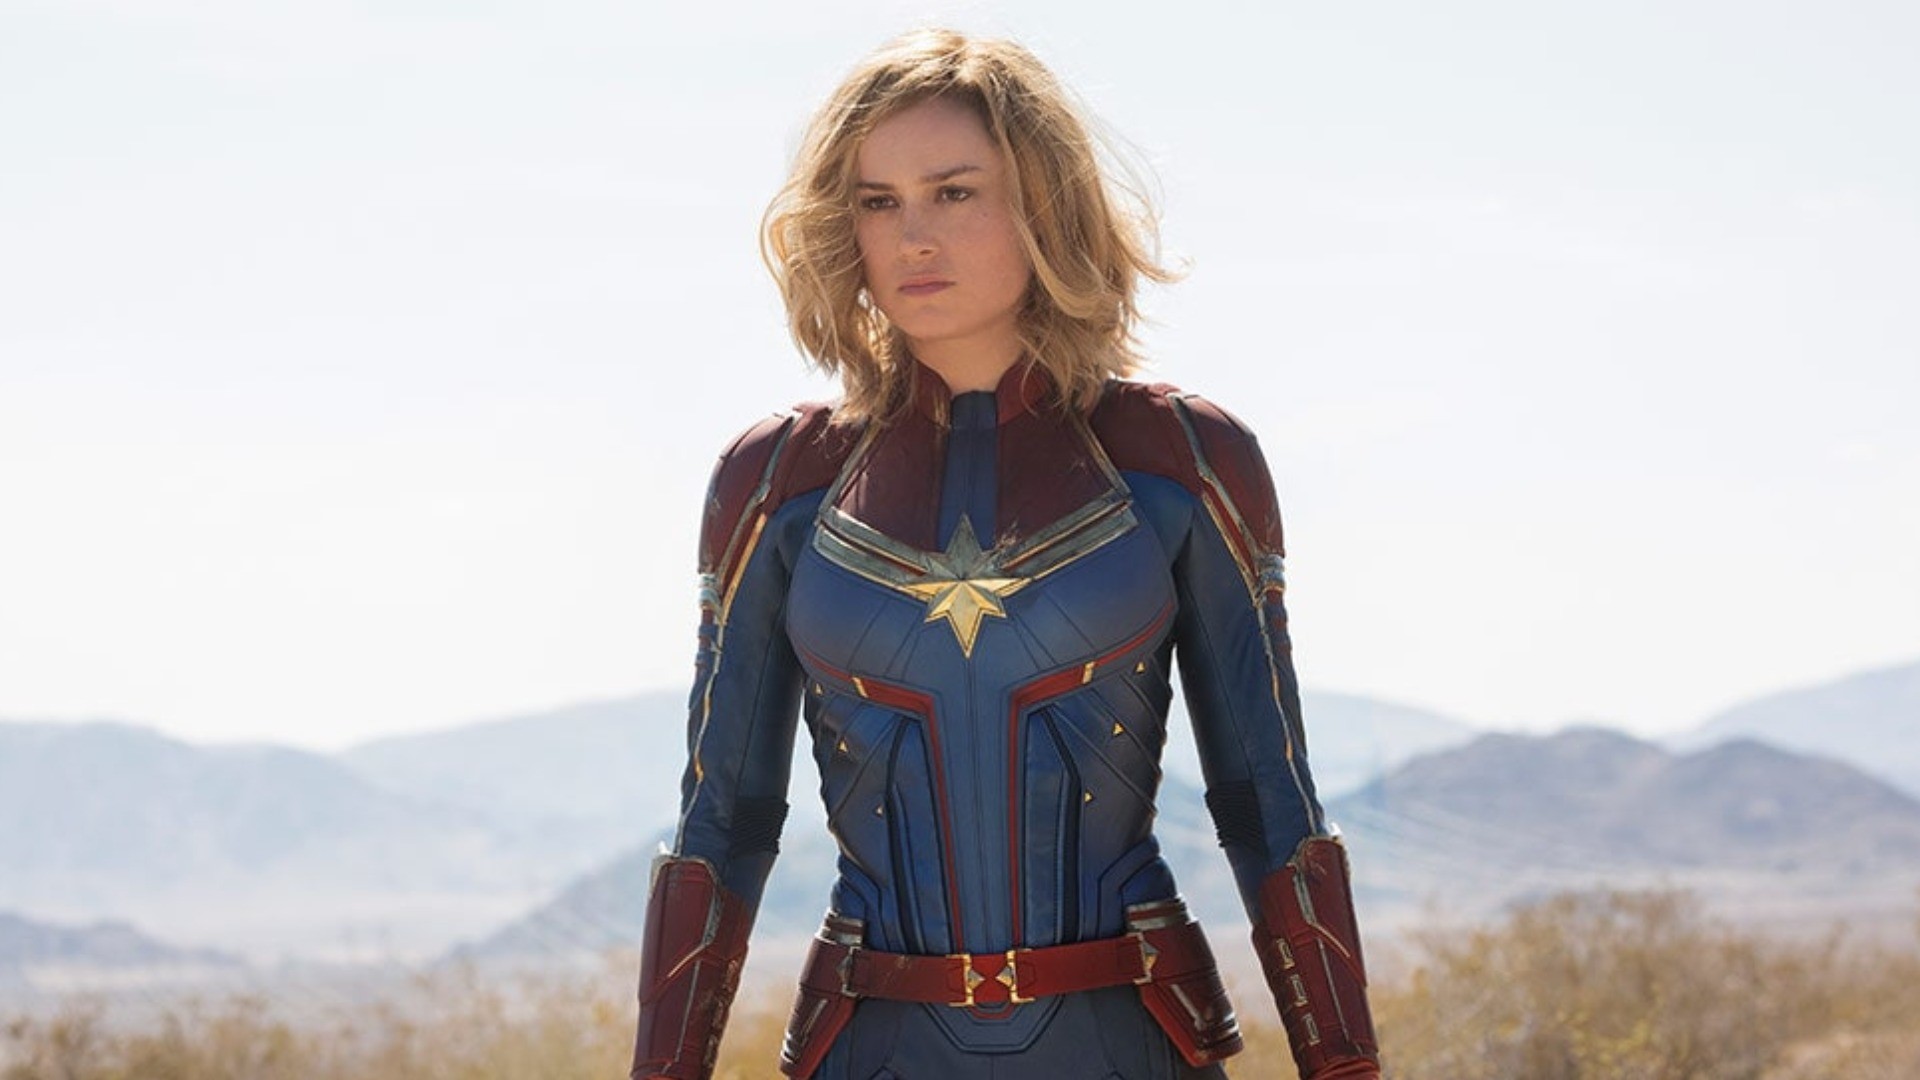 'Captain Marvel' premiers in theaters this weekend, and Netflix released a few new movies for streaming. Director Shawn Hobbs has the latest list from the Director's Chair.